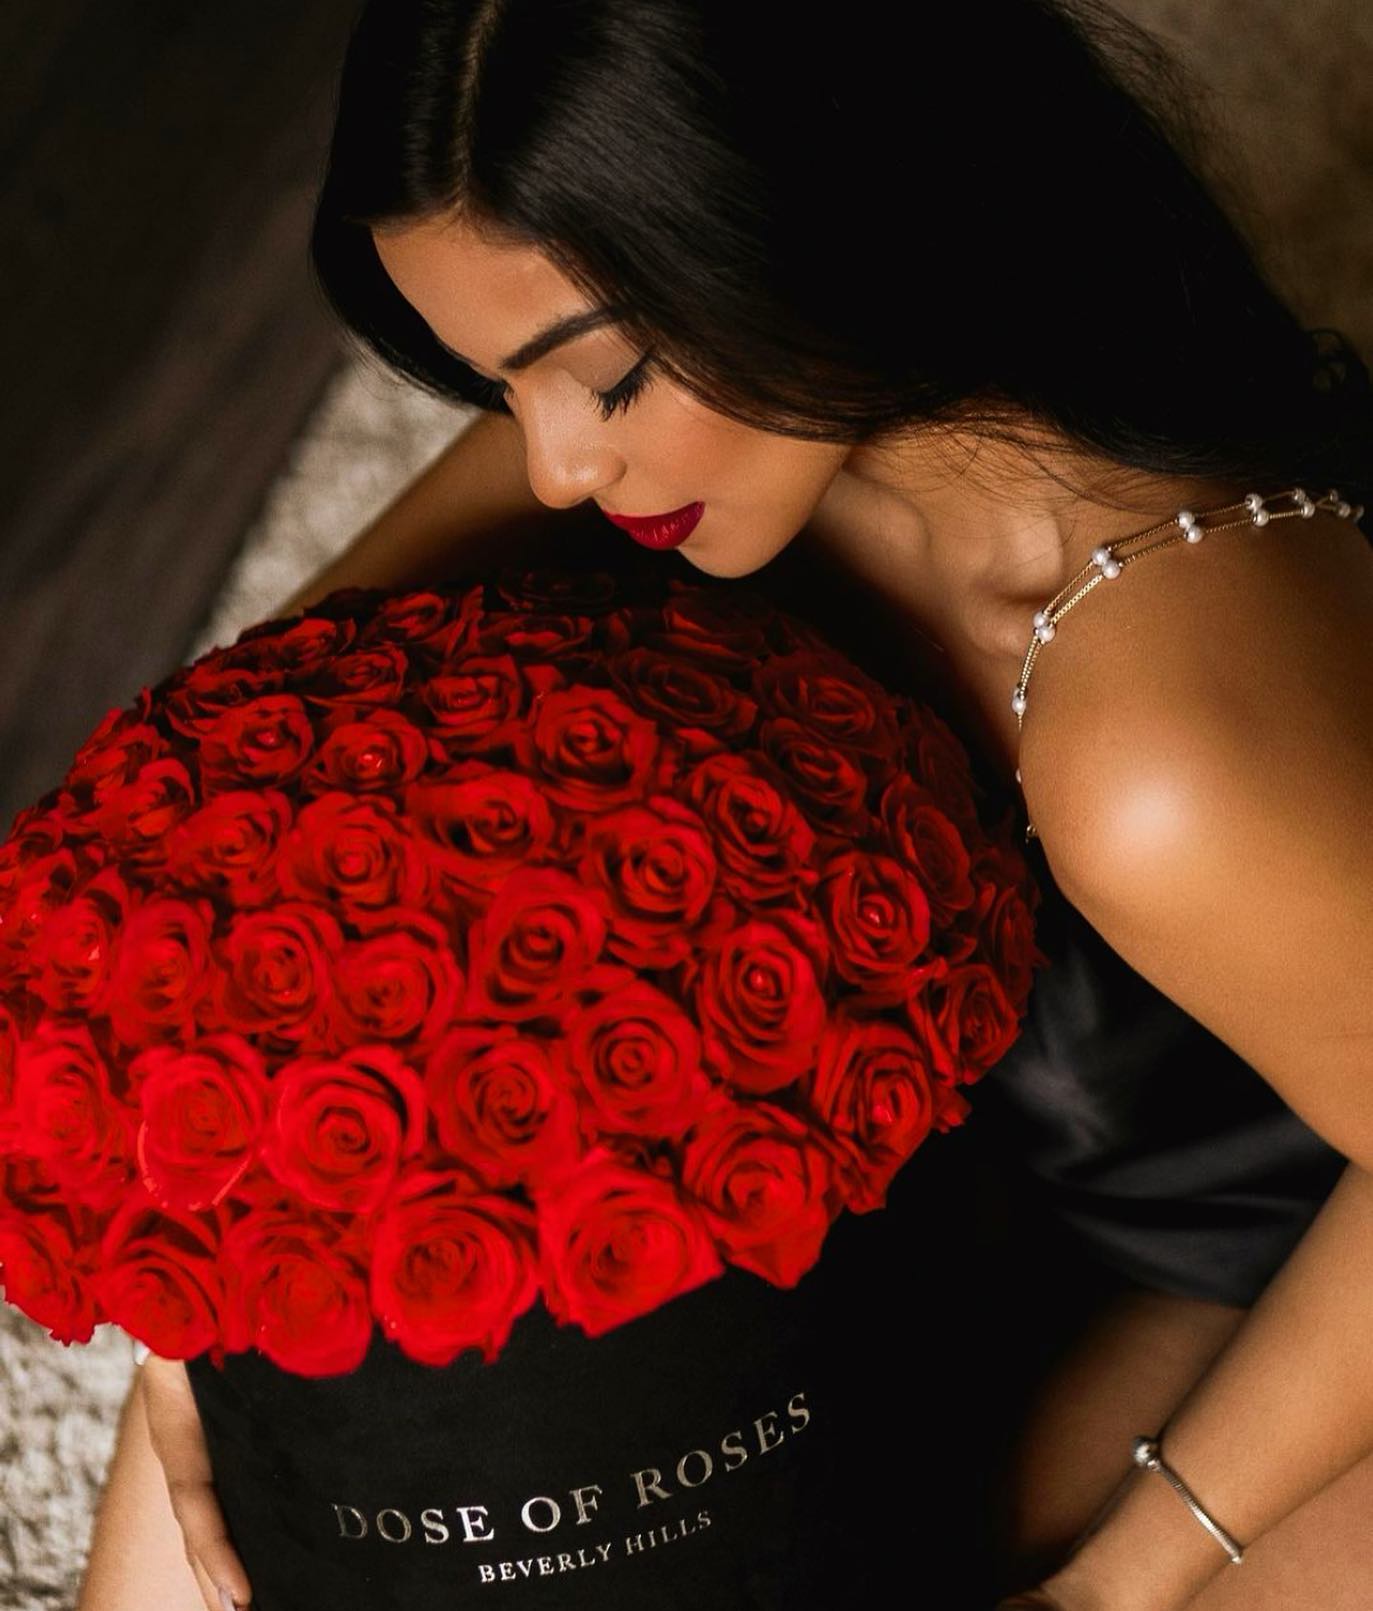 Joseph Ayoub on How He Made Dose of Roses the Fastest Growing Brand in the World